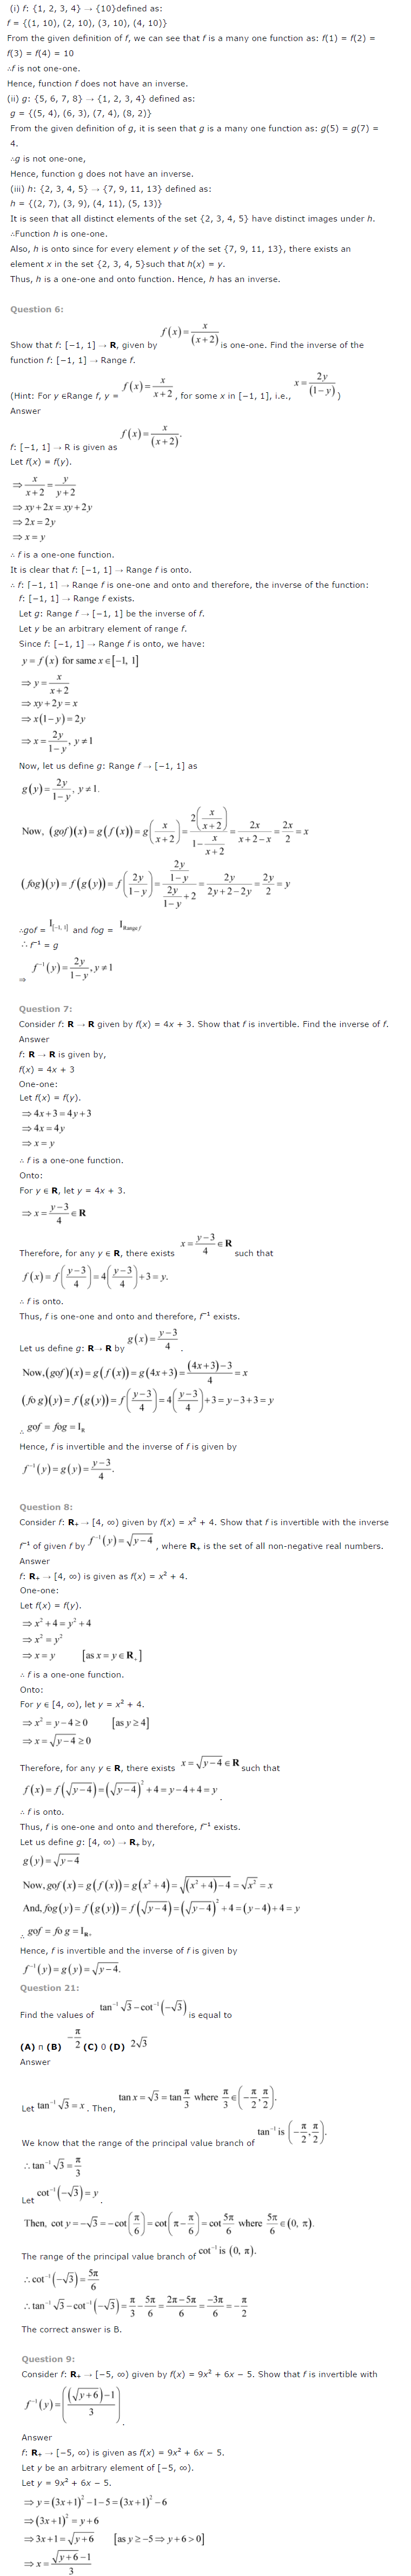 NCERT Solutions For Class 12 Maths Chapter 1 Relations and Functions-6